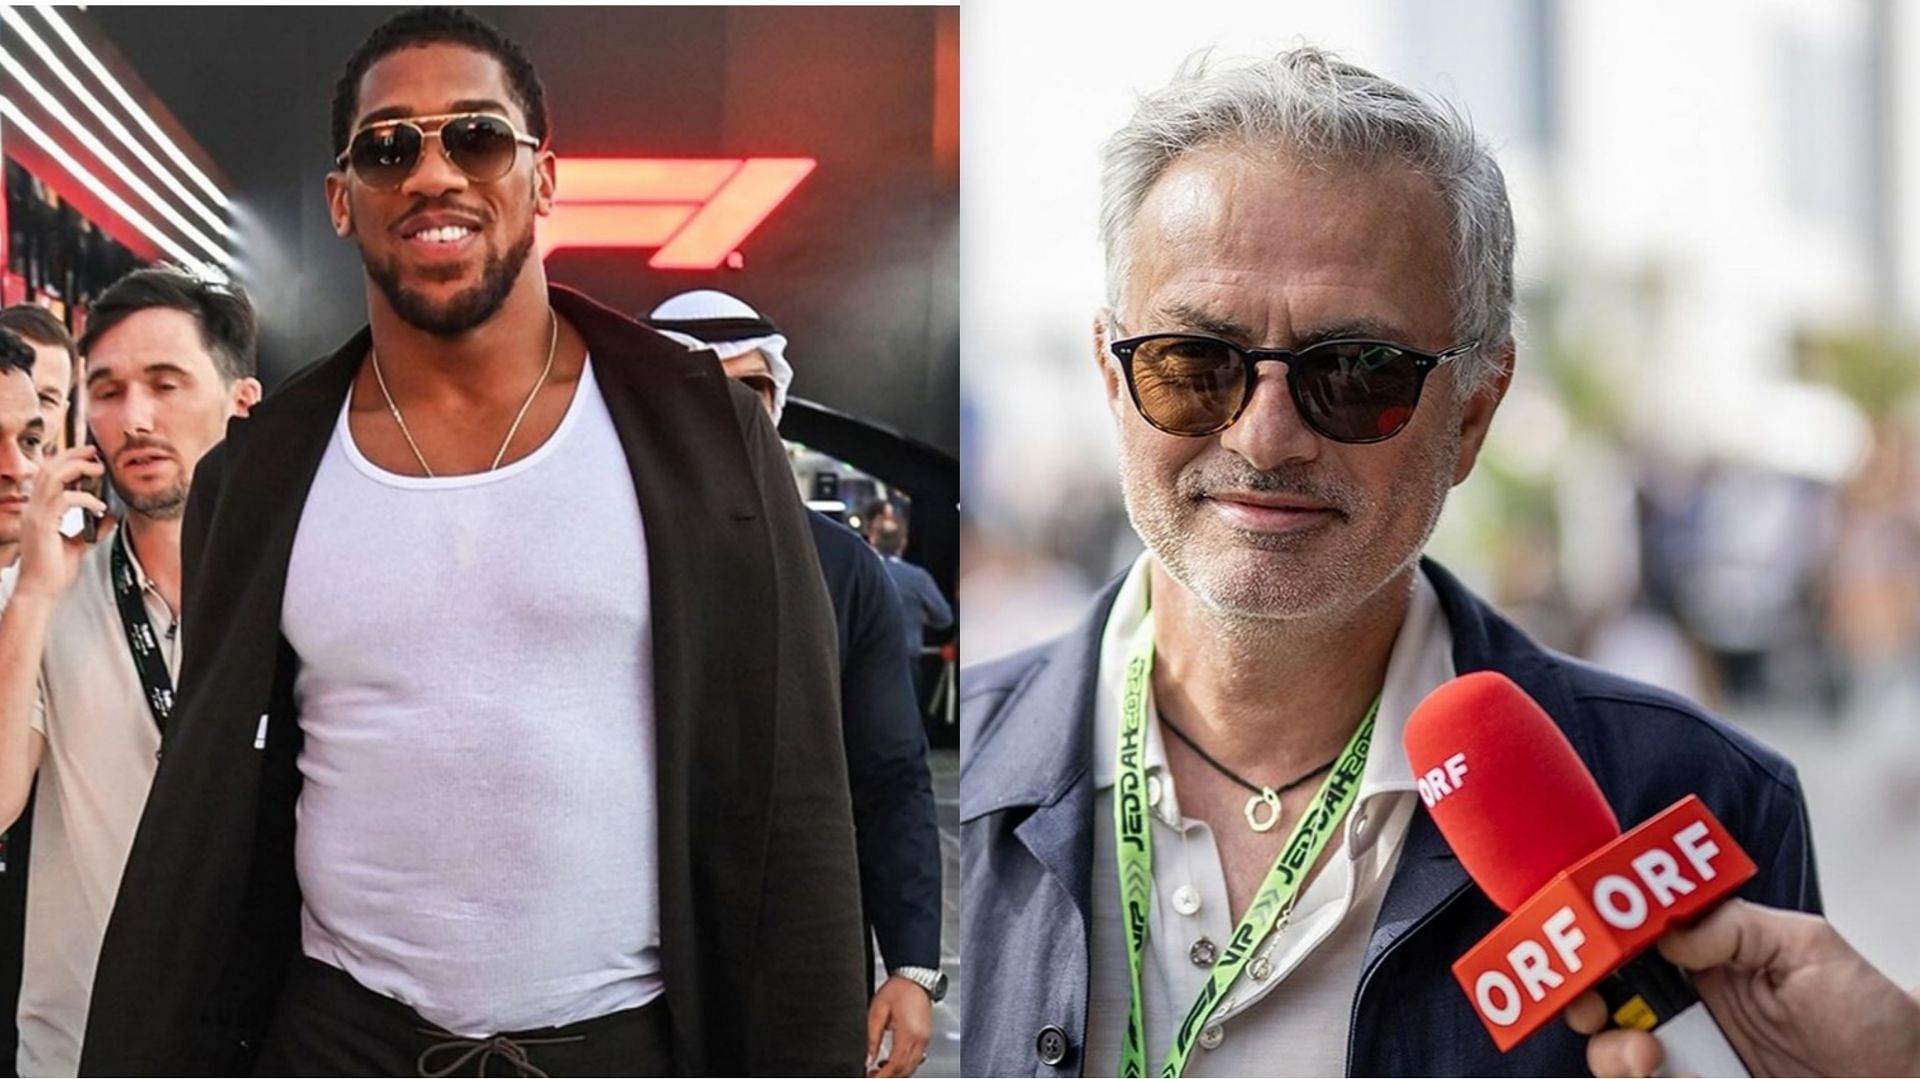 Anthony Joshua (left) and Jose Mourinho (right) among the celebrities who lit up the 2024 F1 Saudi Arabian GP (Image from Instagram)